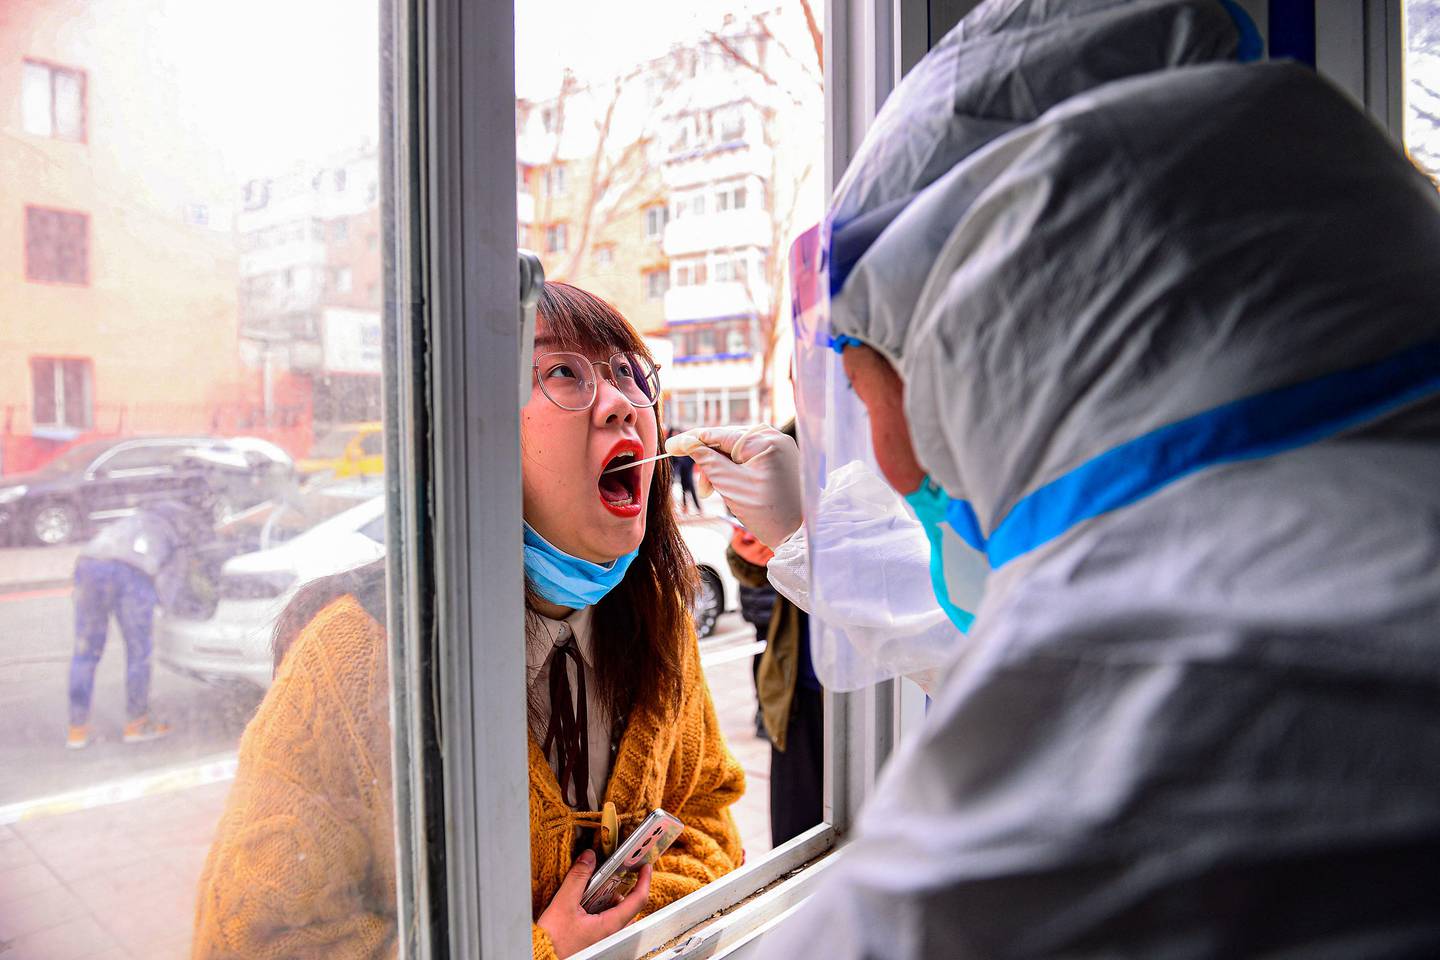 A resident (L) undergoes a nucleic acid test for the Covid-19 coronavirus in Shenyang in China's northeastern Liaoning province on March 9, 2022.  (Photo by AFP)  /  China OUT